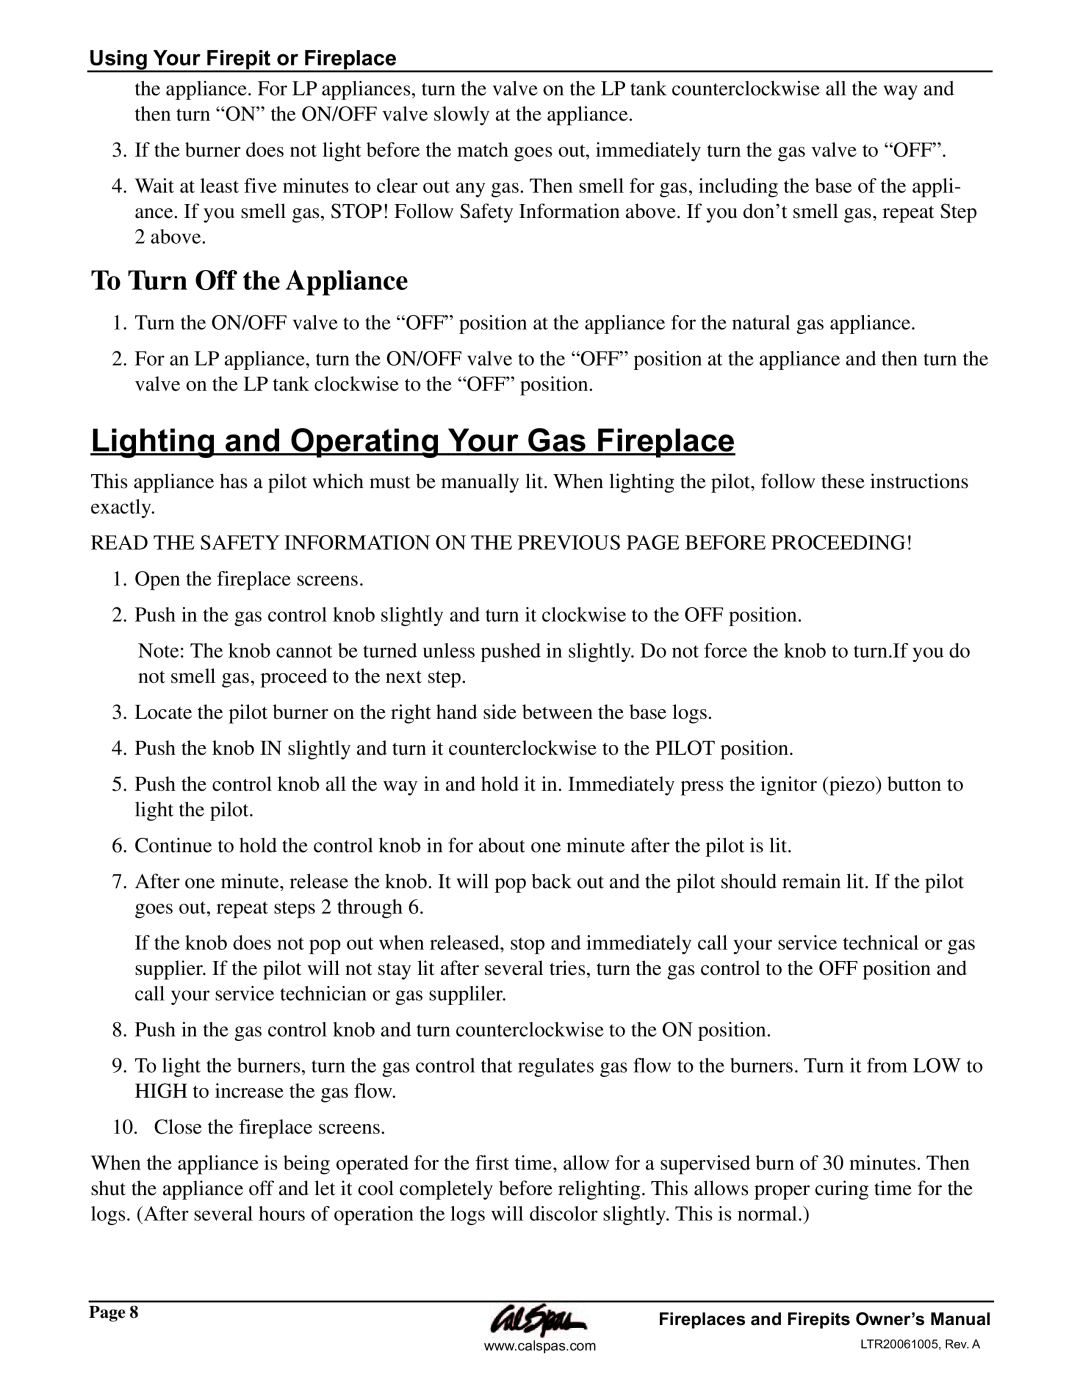 Cal Flame Fireplaces & Firepits 2006 manual Lighting and Operating Your Gas Fireplace, To Turn Off the Appliance 